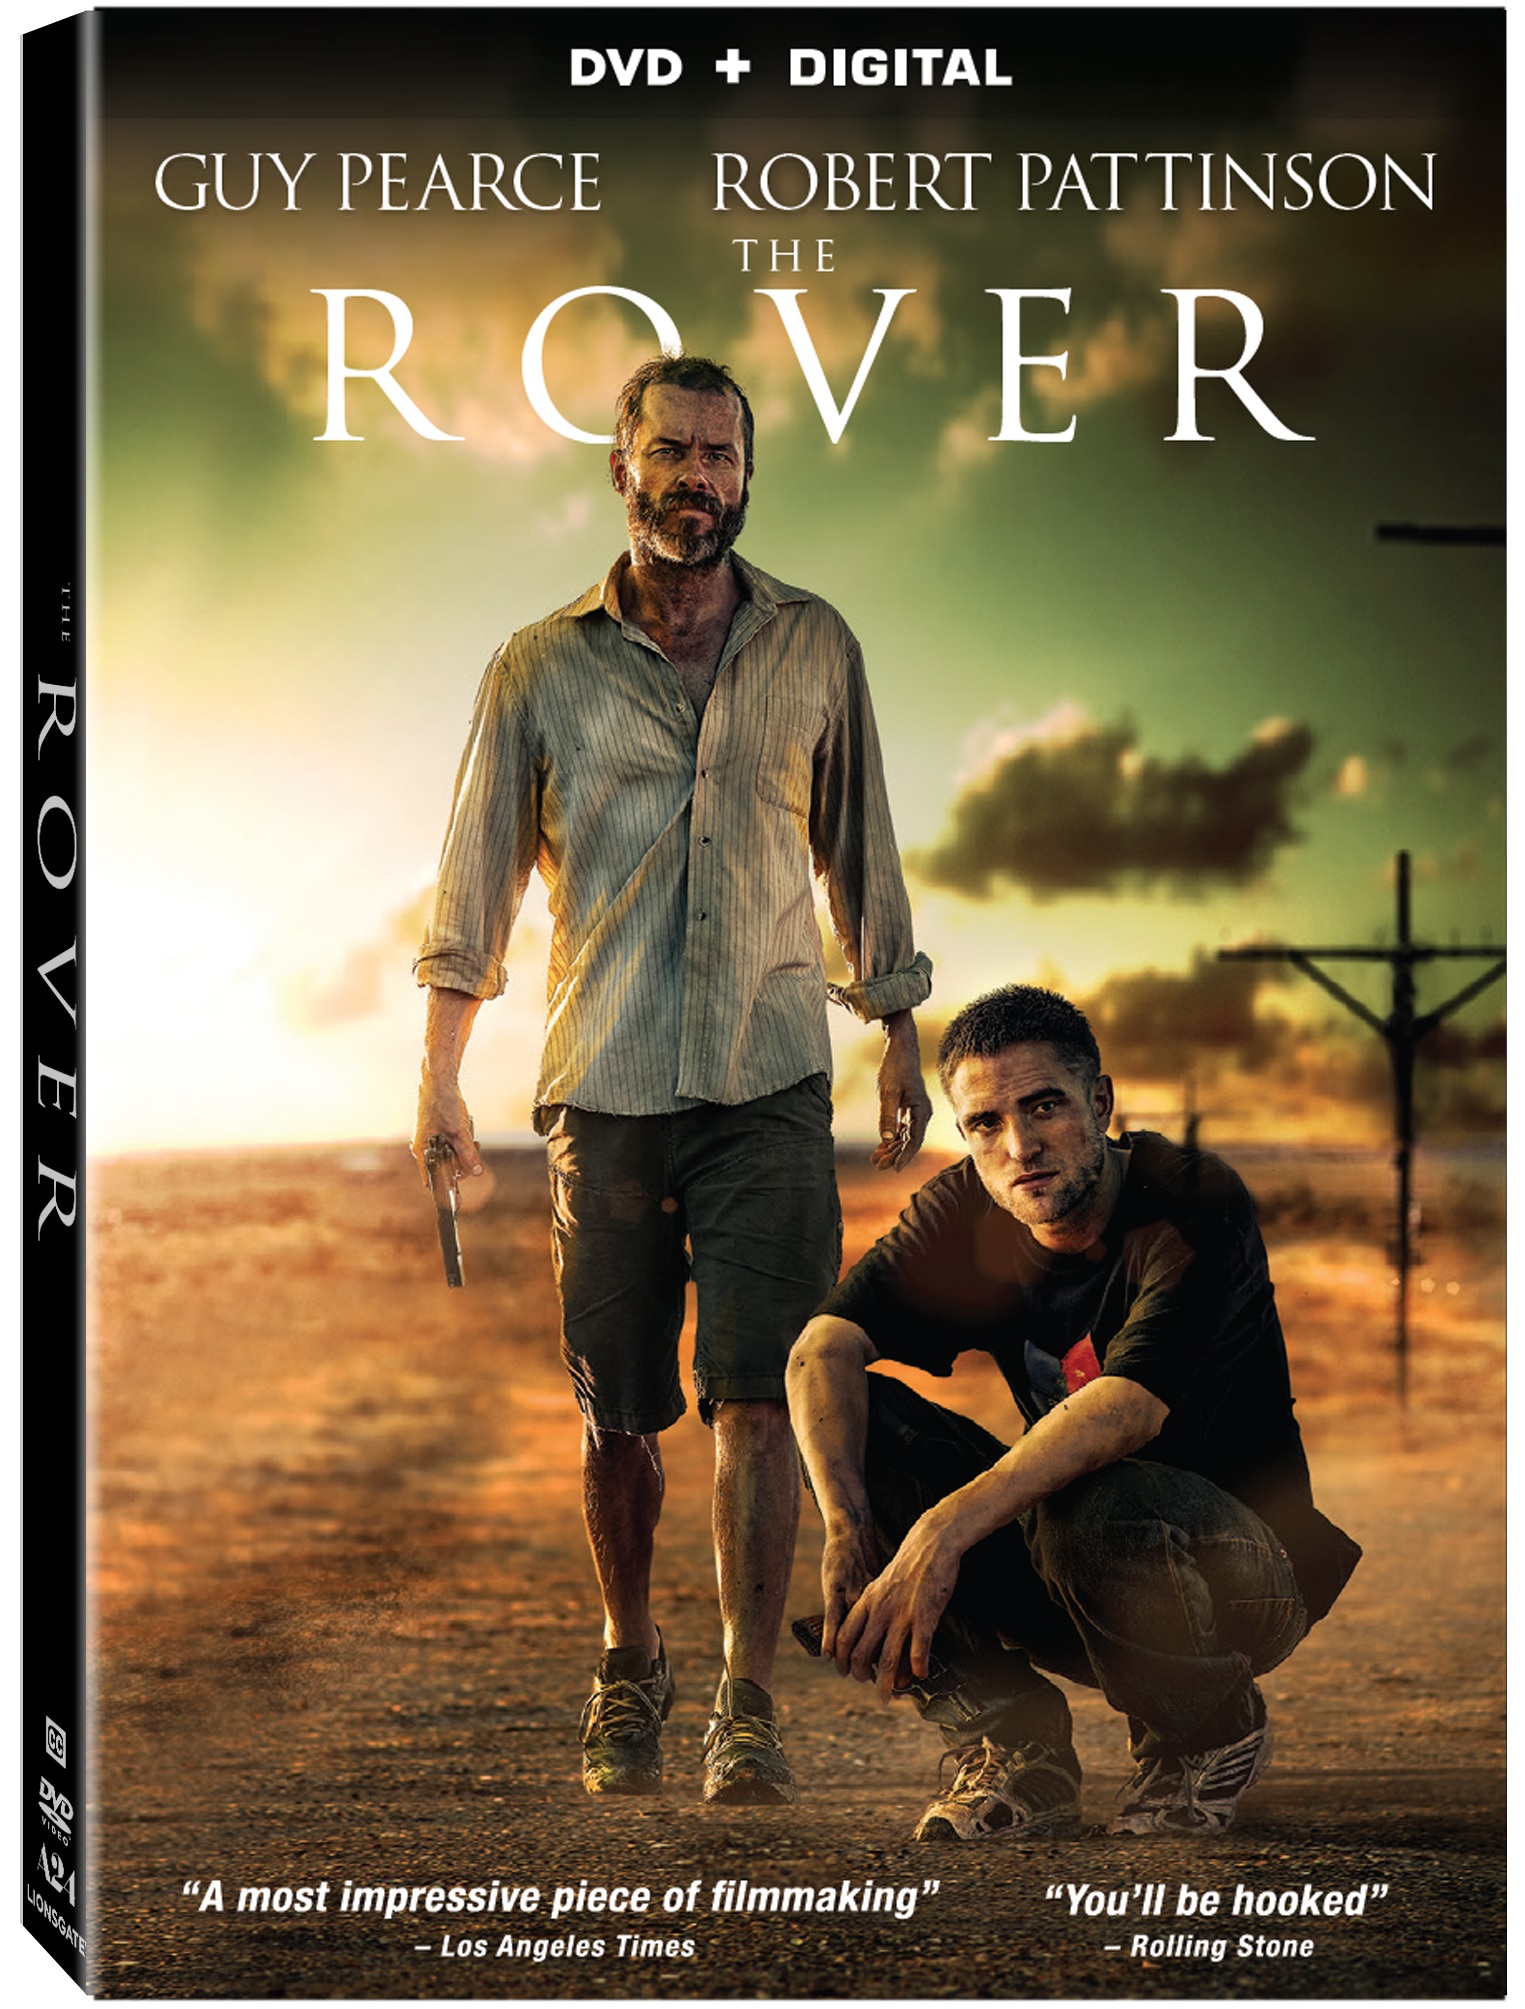 The Rover DVD Review